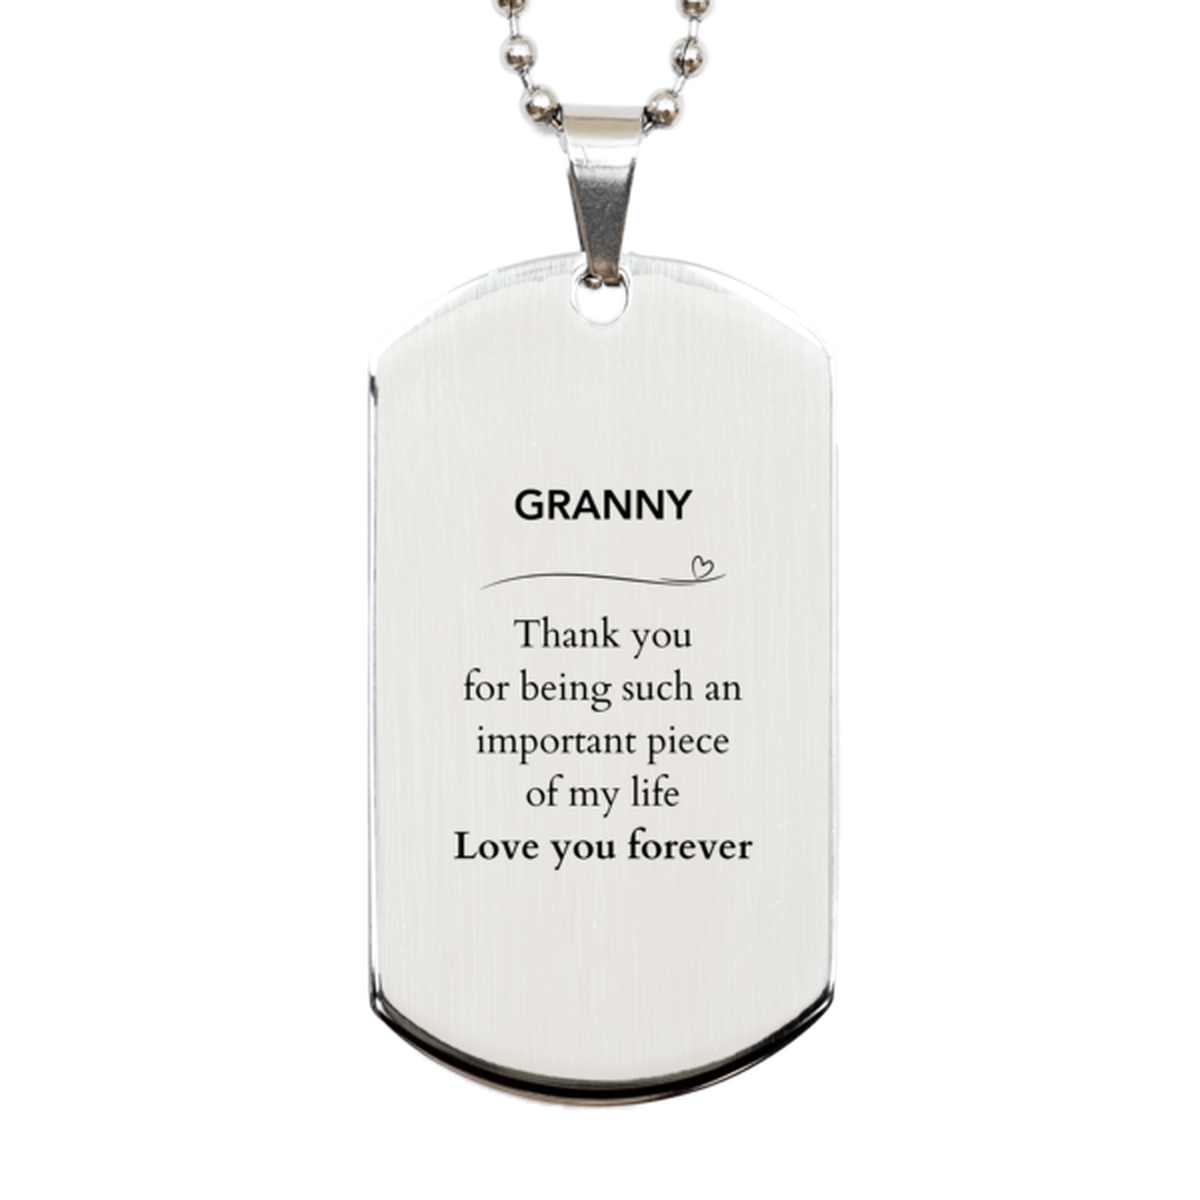 Appropriate Granny Silver Dog Tag Epic Birthday Gifts for Granny Thank you for being such an important piece of my life Granny Christmas Mothers Fathers Day